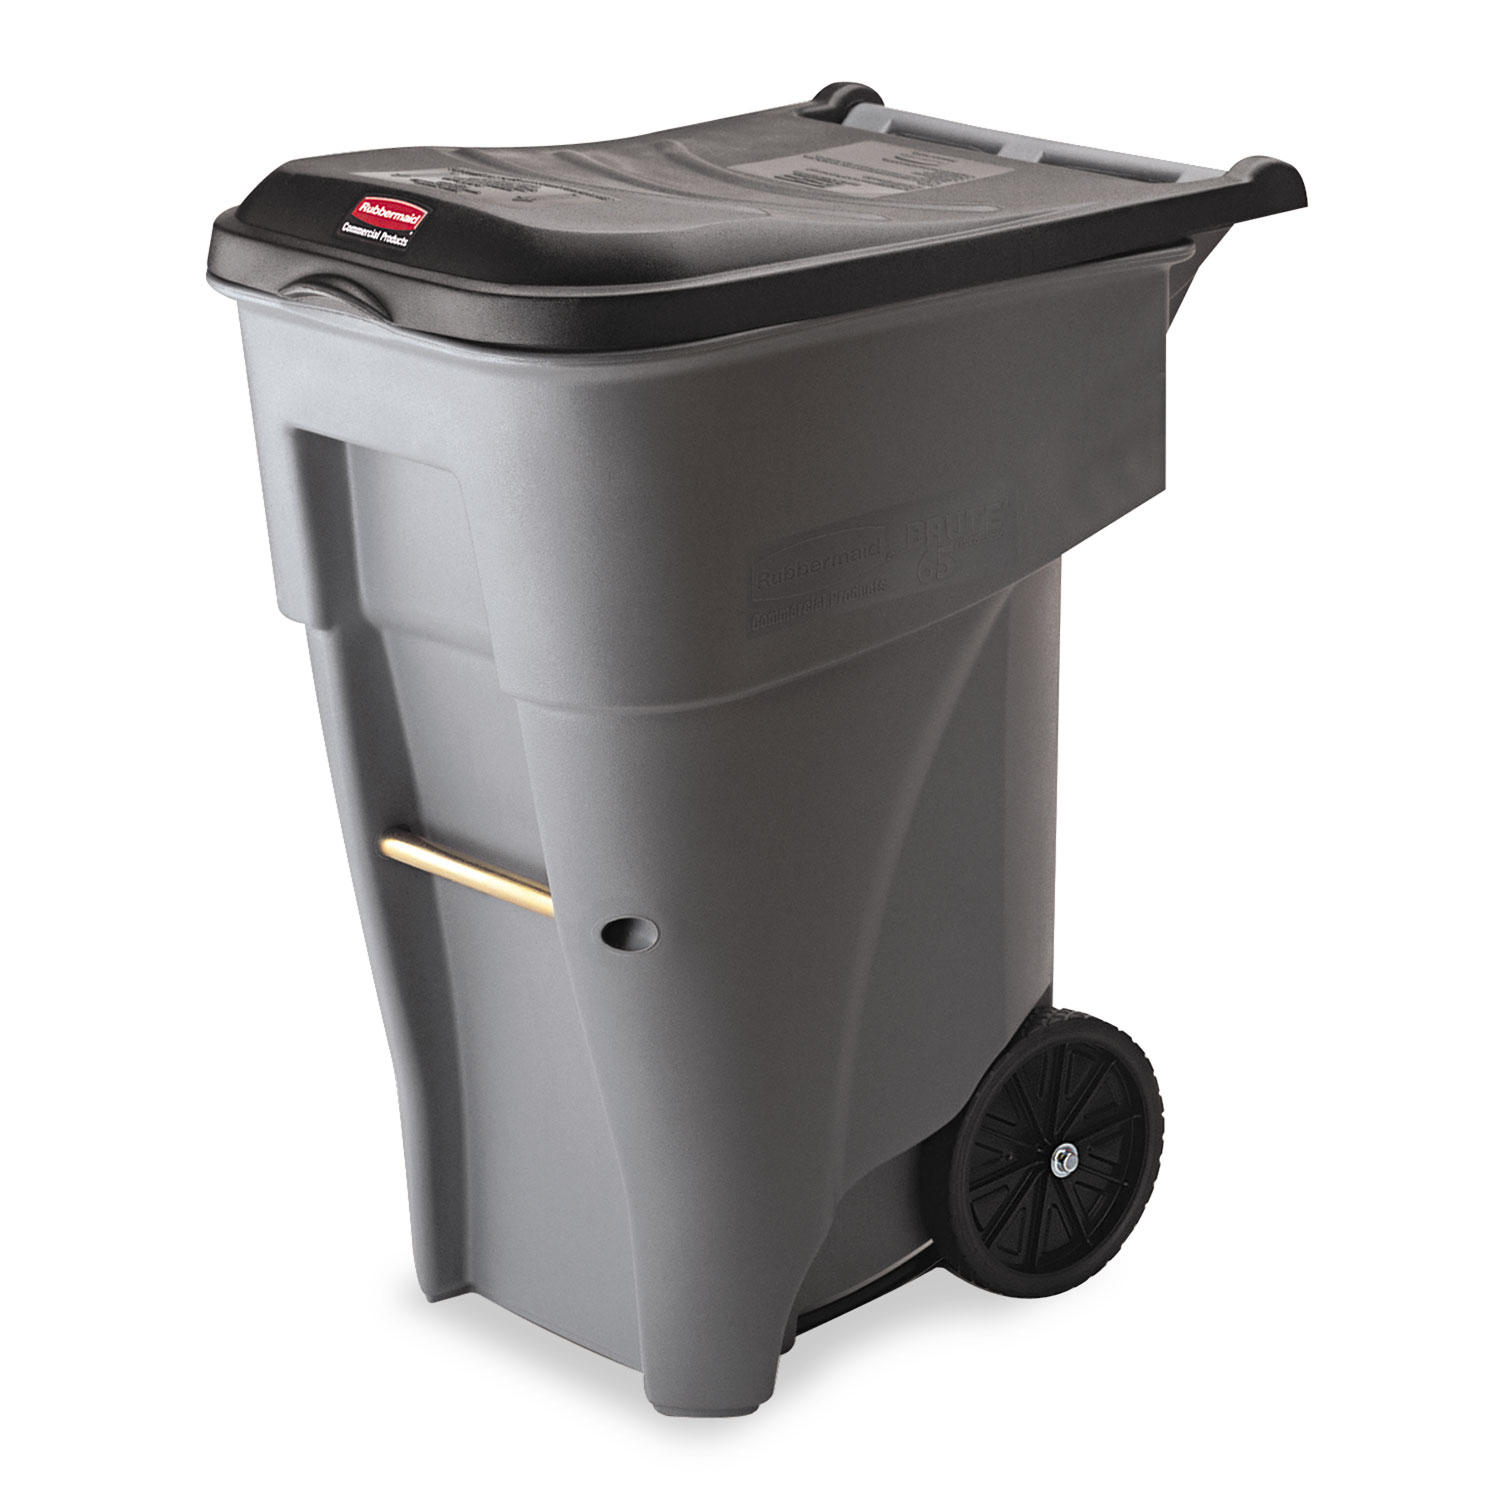  Rubbermaid Commercial FG9W2100GRAY Brute Rollout Heavy-Duty Waste Container, Square, Polyethylene, 65 gal, Gray (RCP9W21GY) 